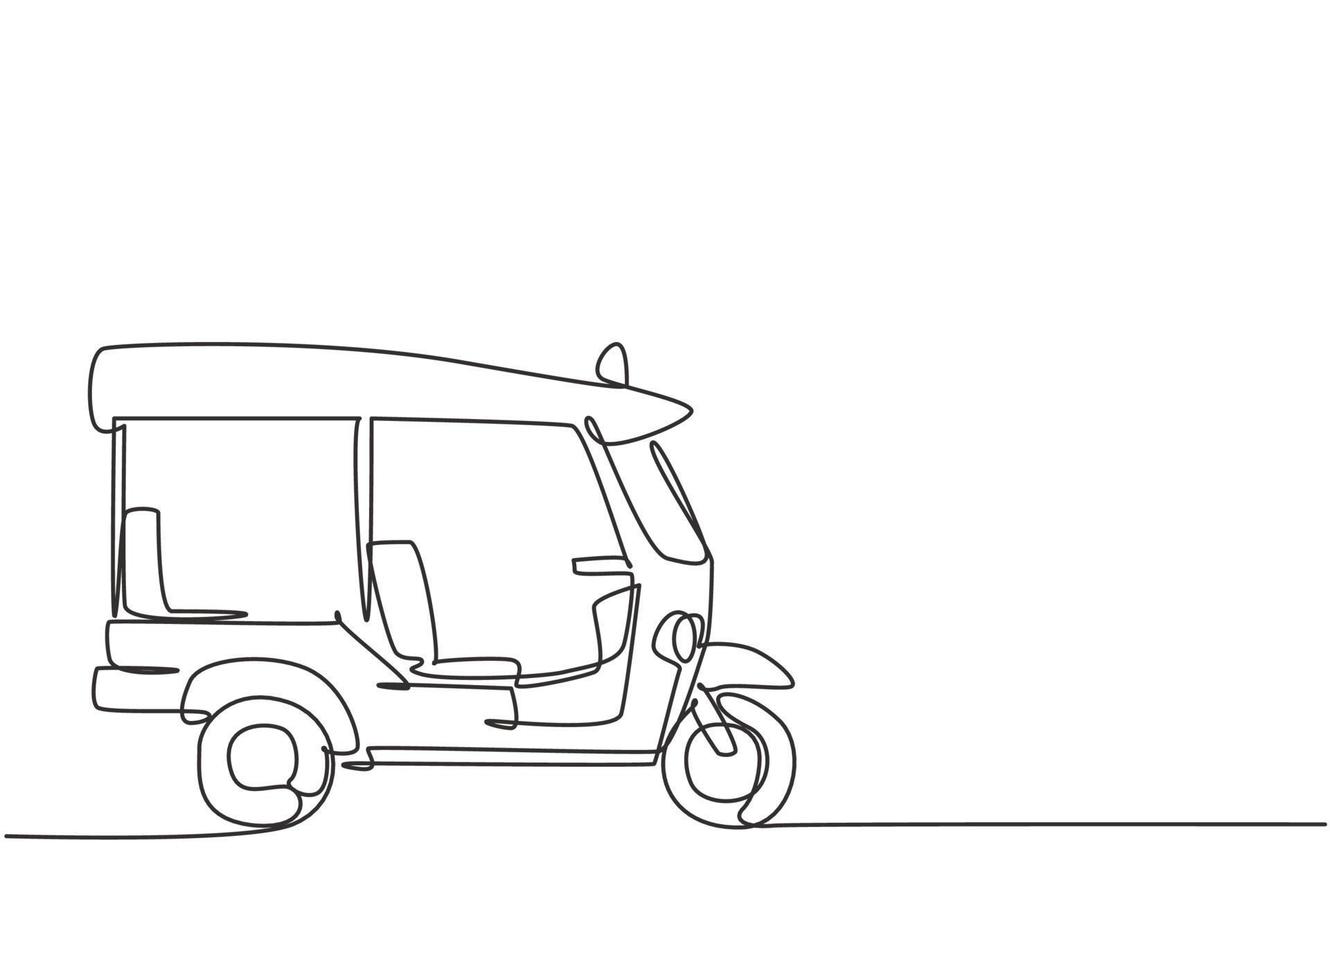 Single one line drawing of Thai tuk tuk seen from the side serving foreign passengers who are traveling in Thailand. Become a tourism icon. Continuous line draw design graphic vector illustration.